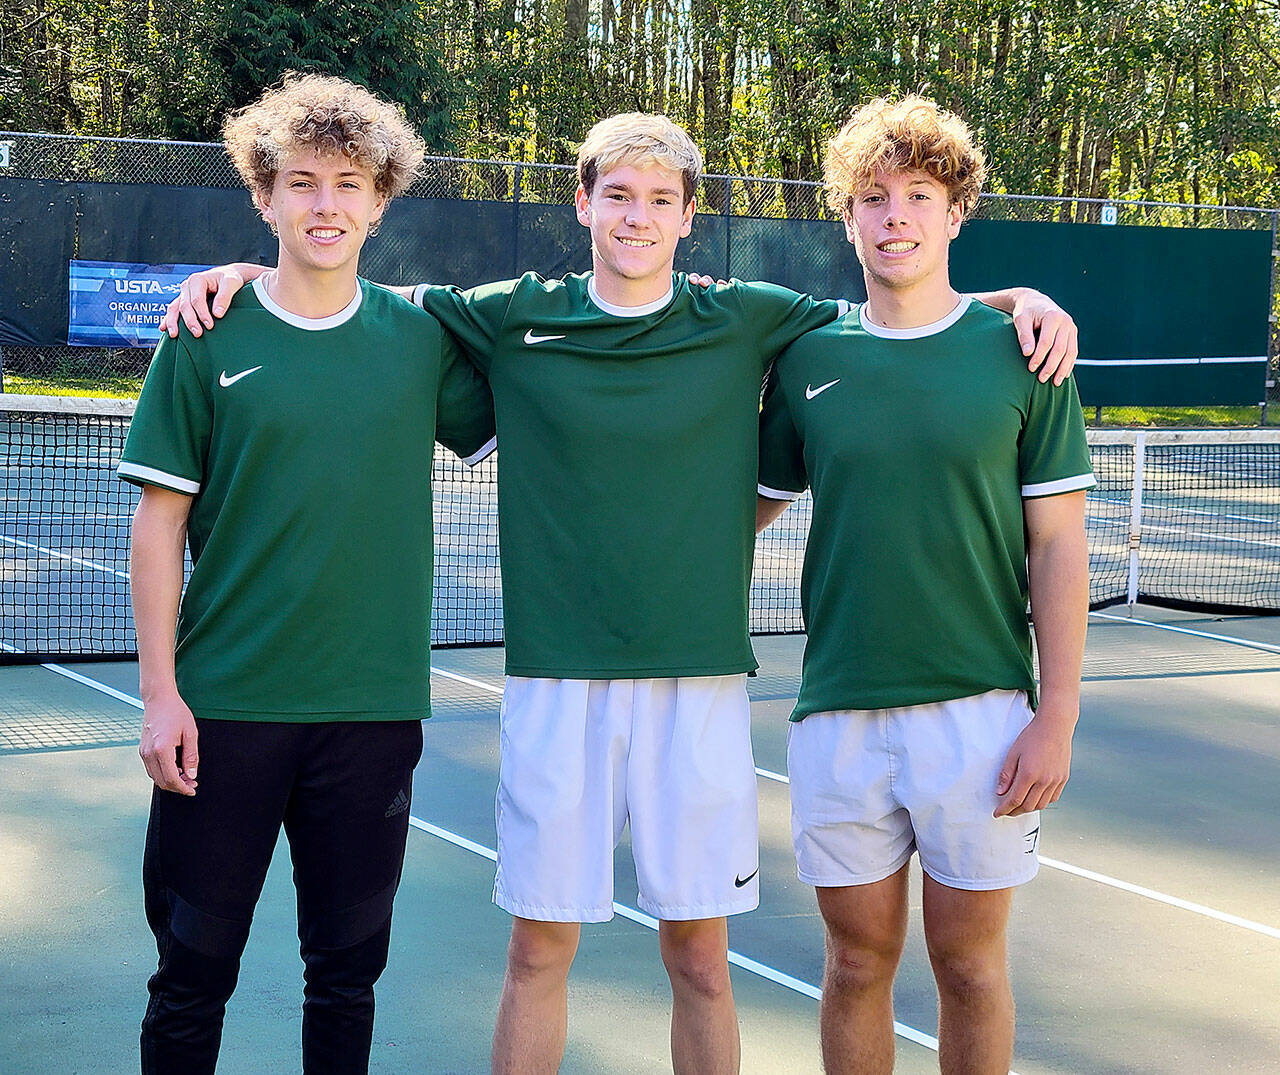 Port Angeles tennis players Michael Soule, Reef Gelder and Damon Gundersen all qualified to play at the 2A state boys tennis tournament in May 2022. (Courtesy photo)